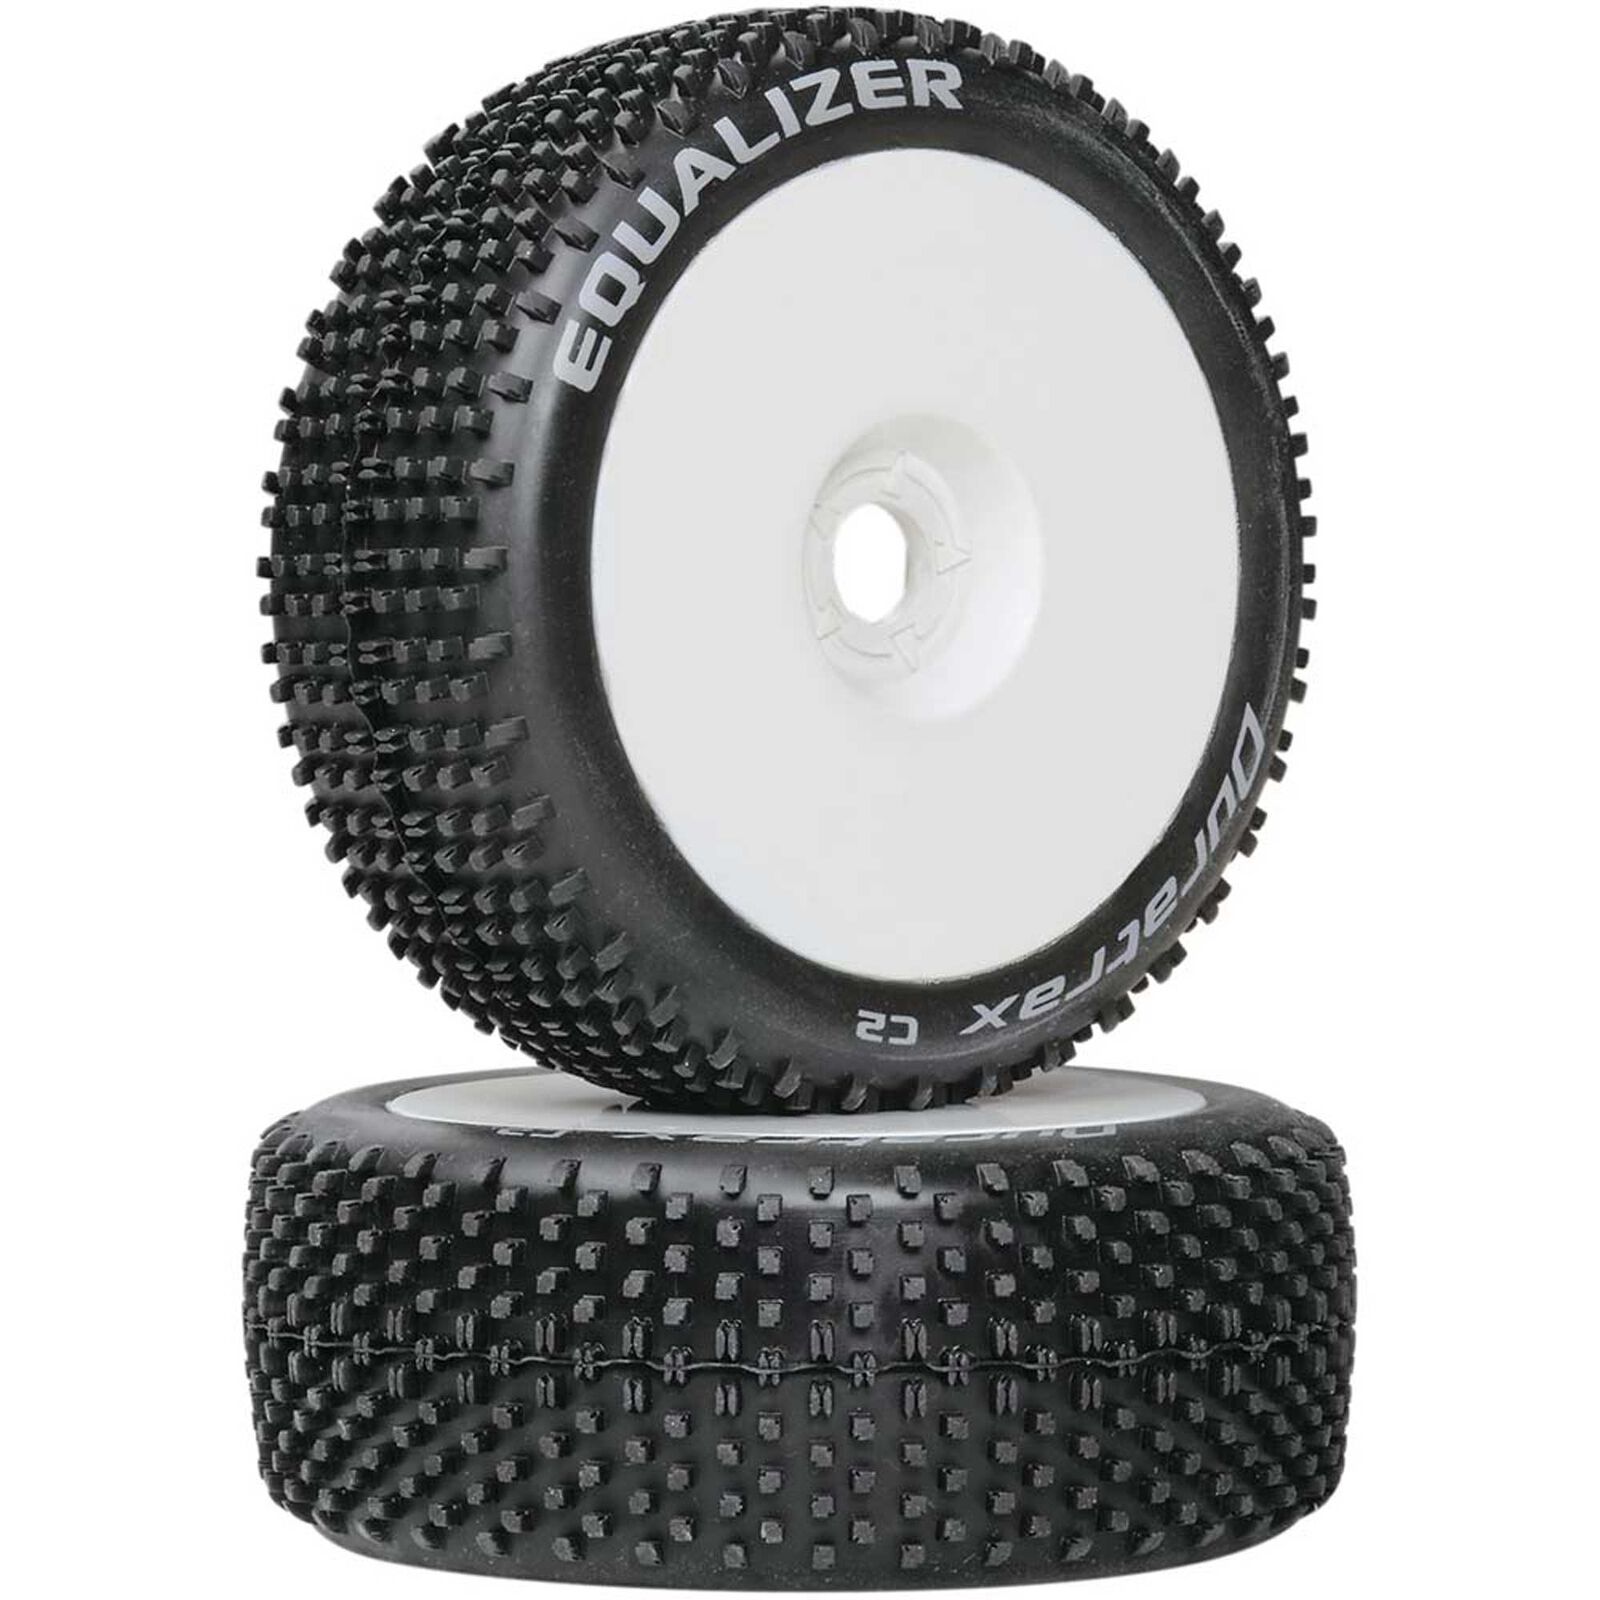 Equalizer 1/8 C2 Mounted Buggy Tires, White (2)